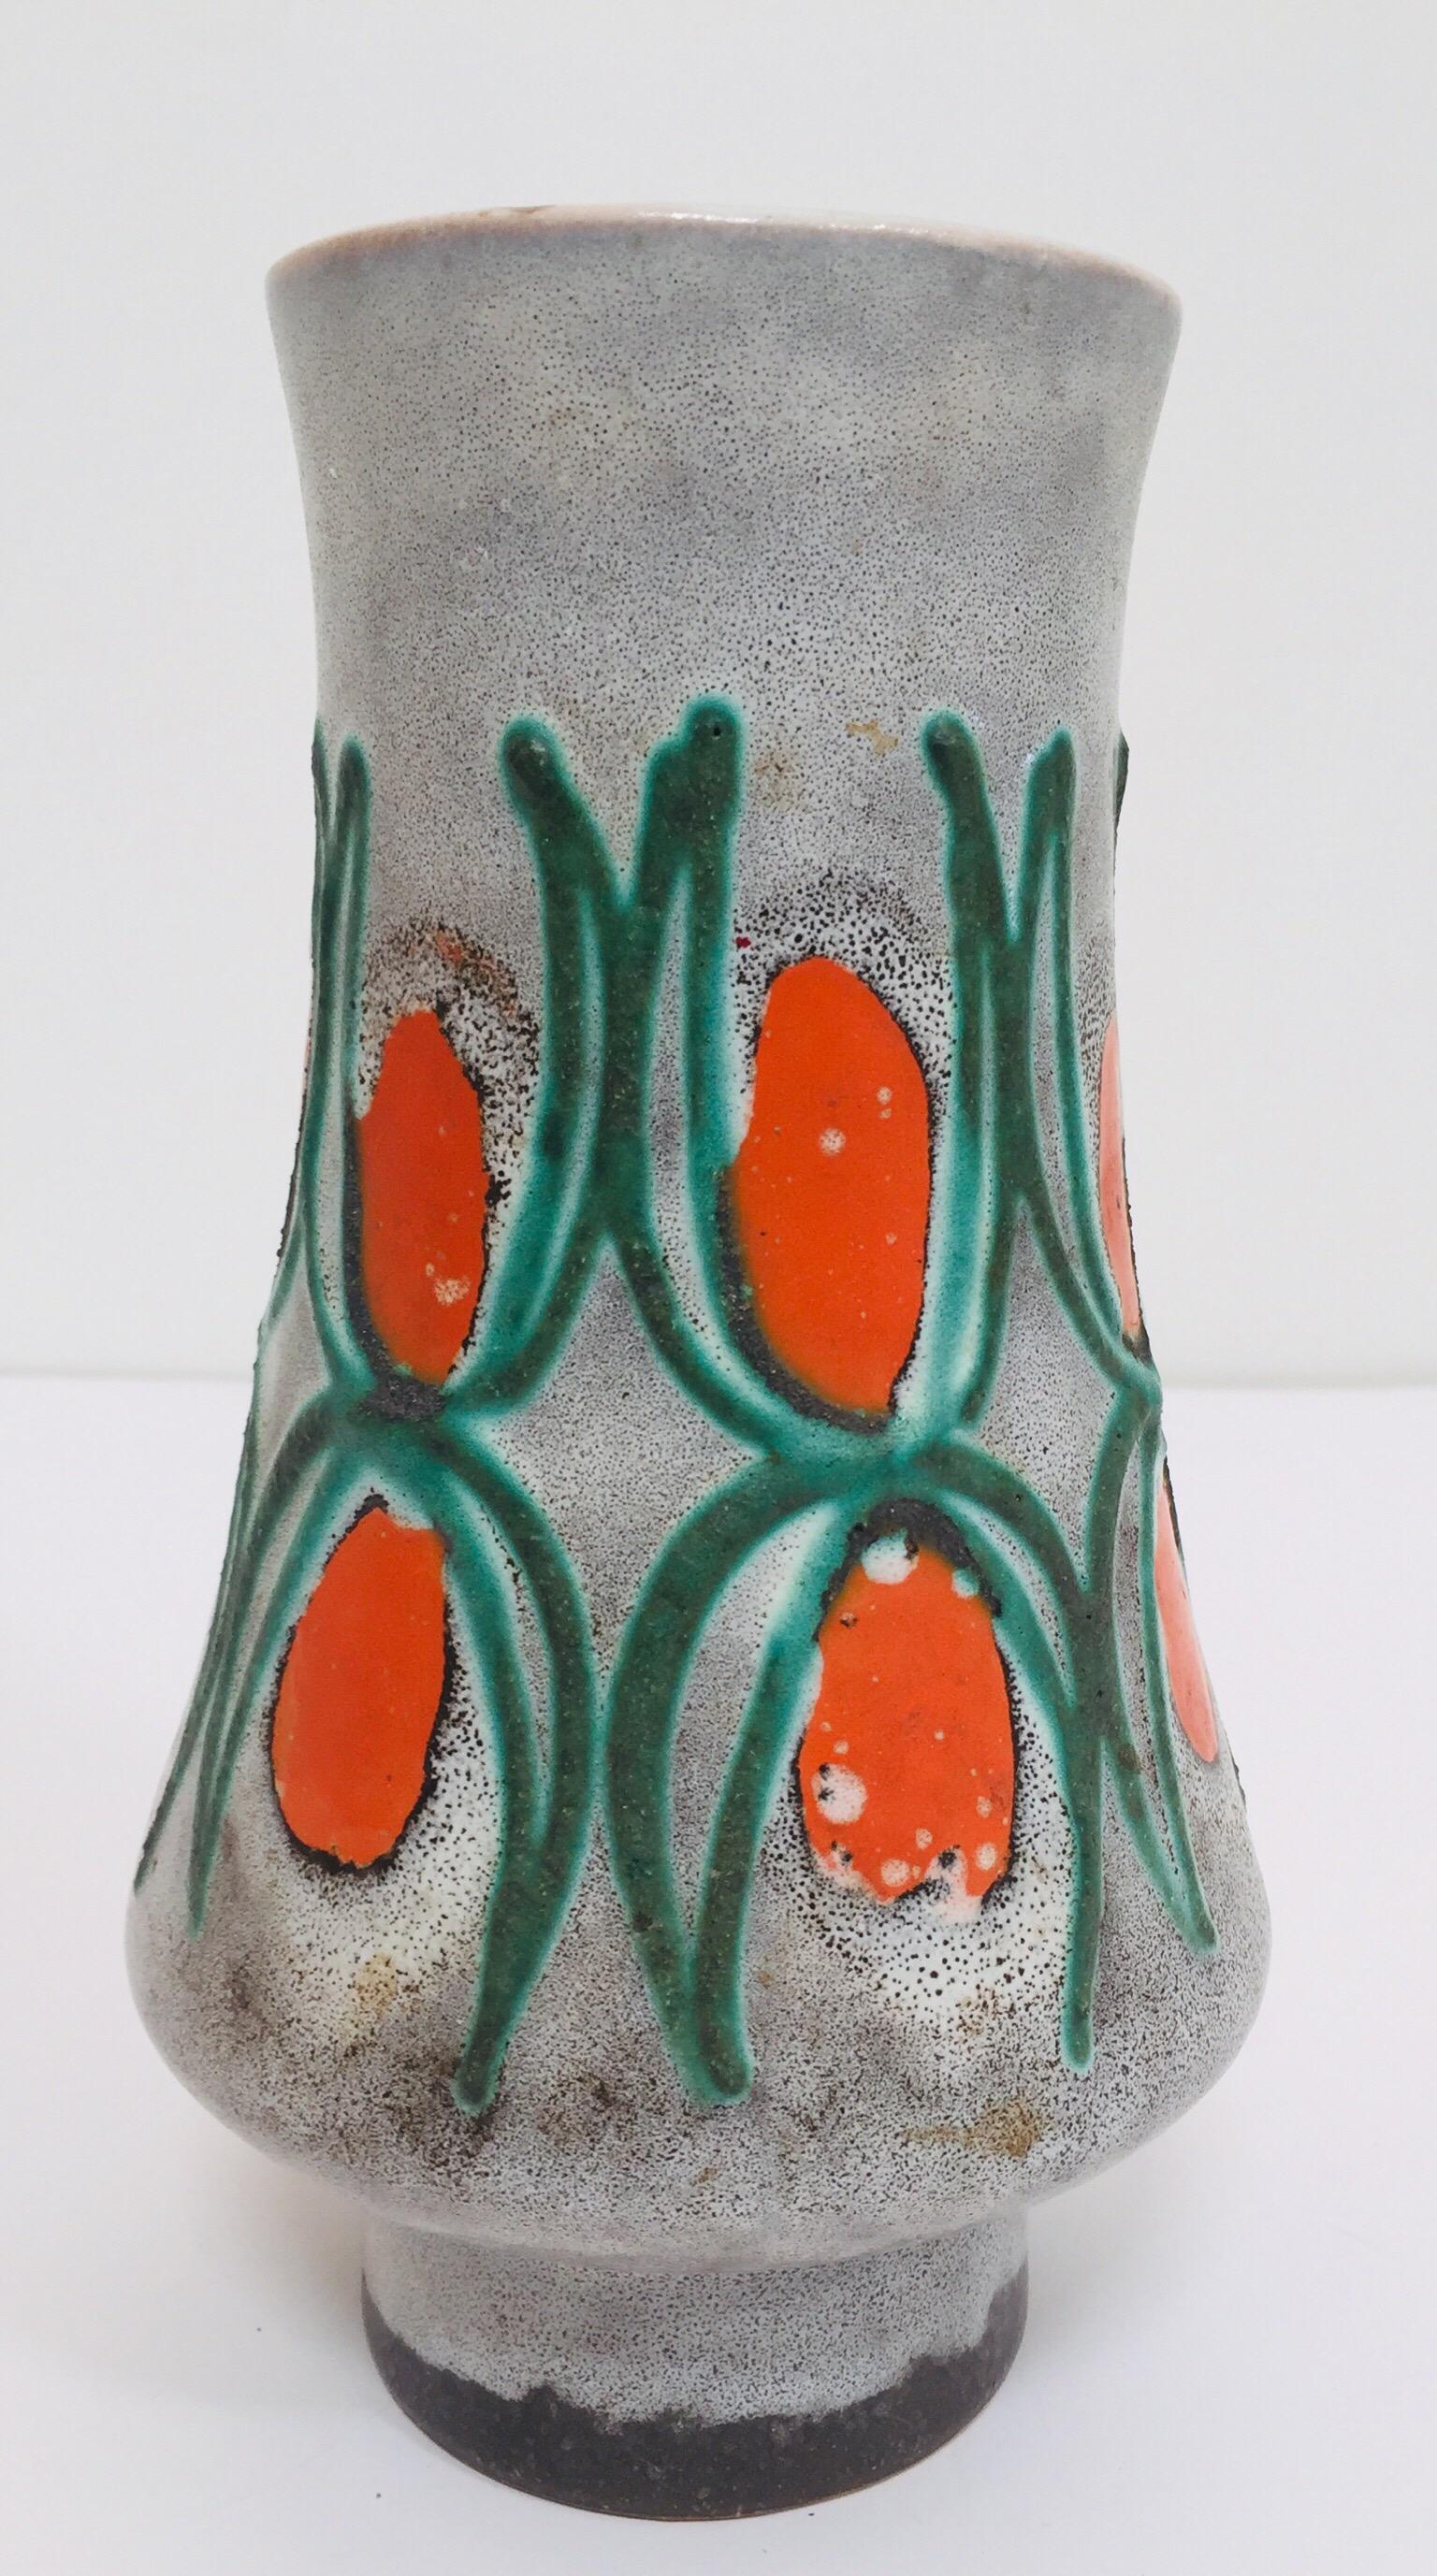 Bauhaus 1950s Midcentury Glazed Vase with Red and Green, Strehla East Germany GDR